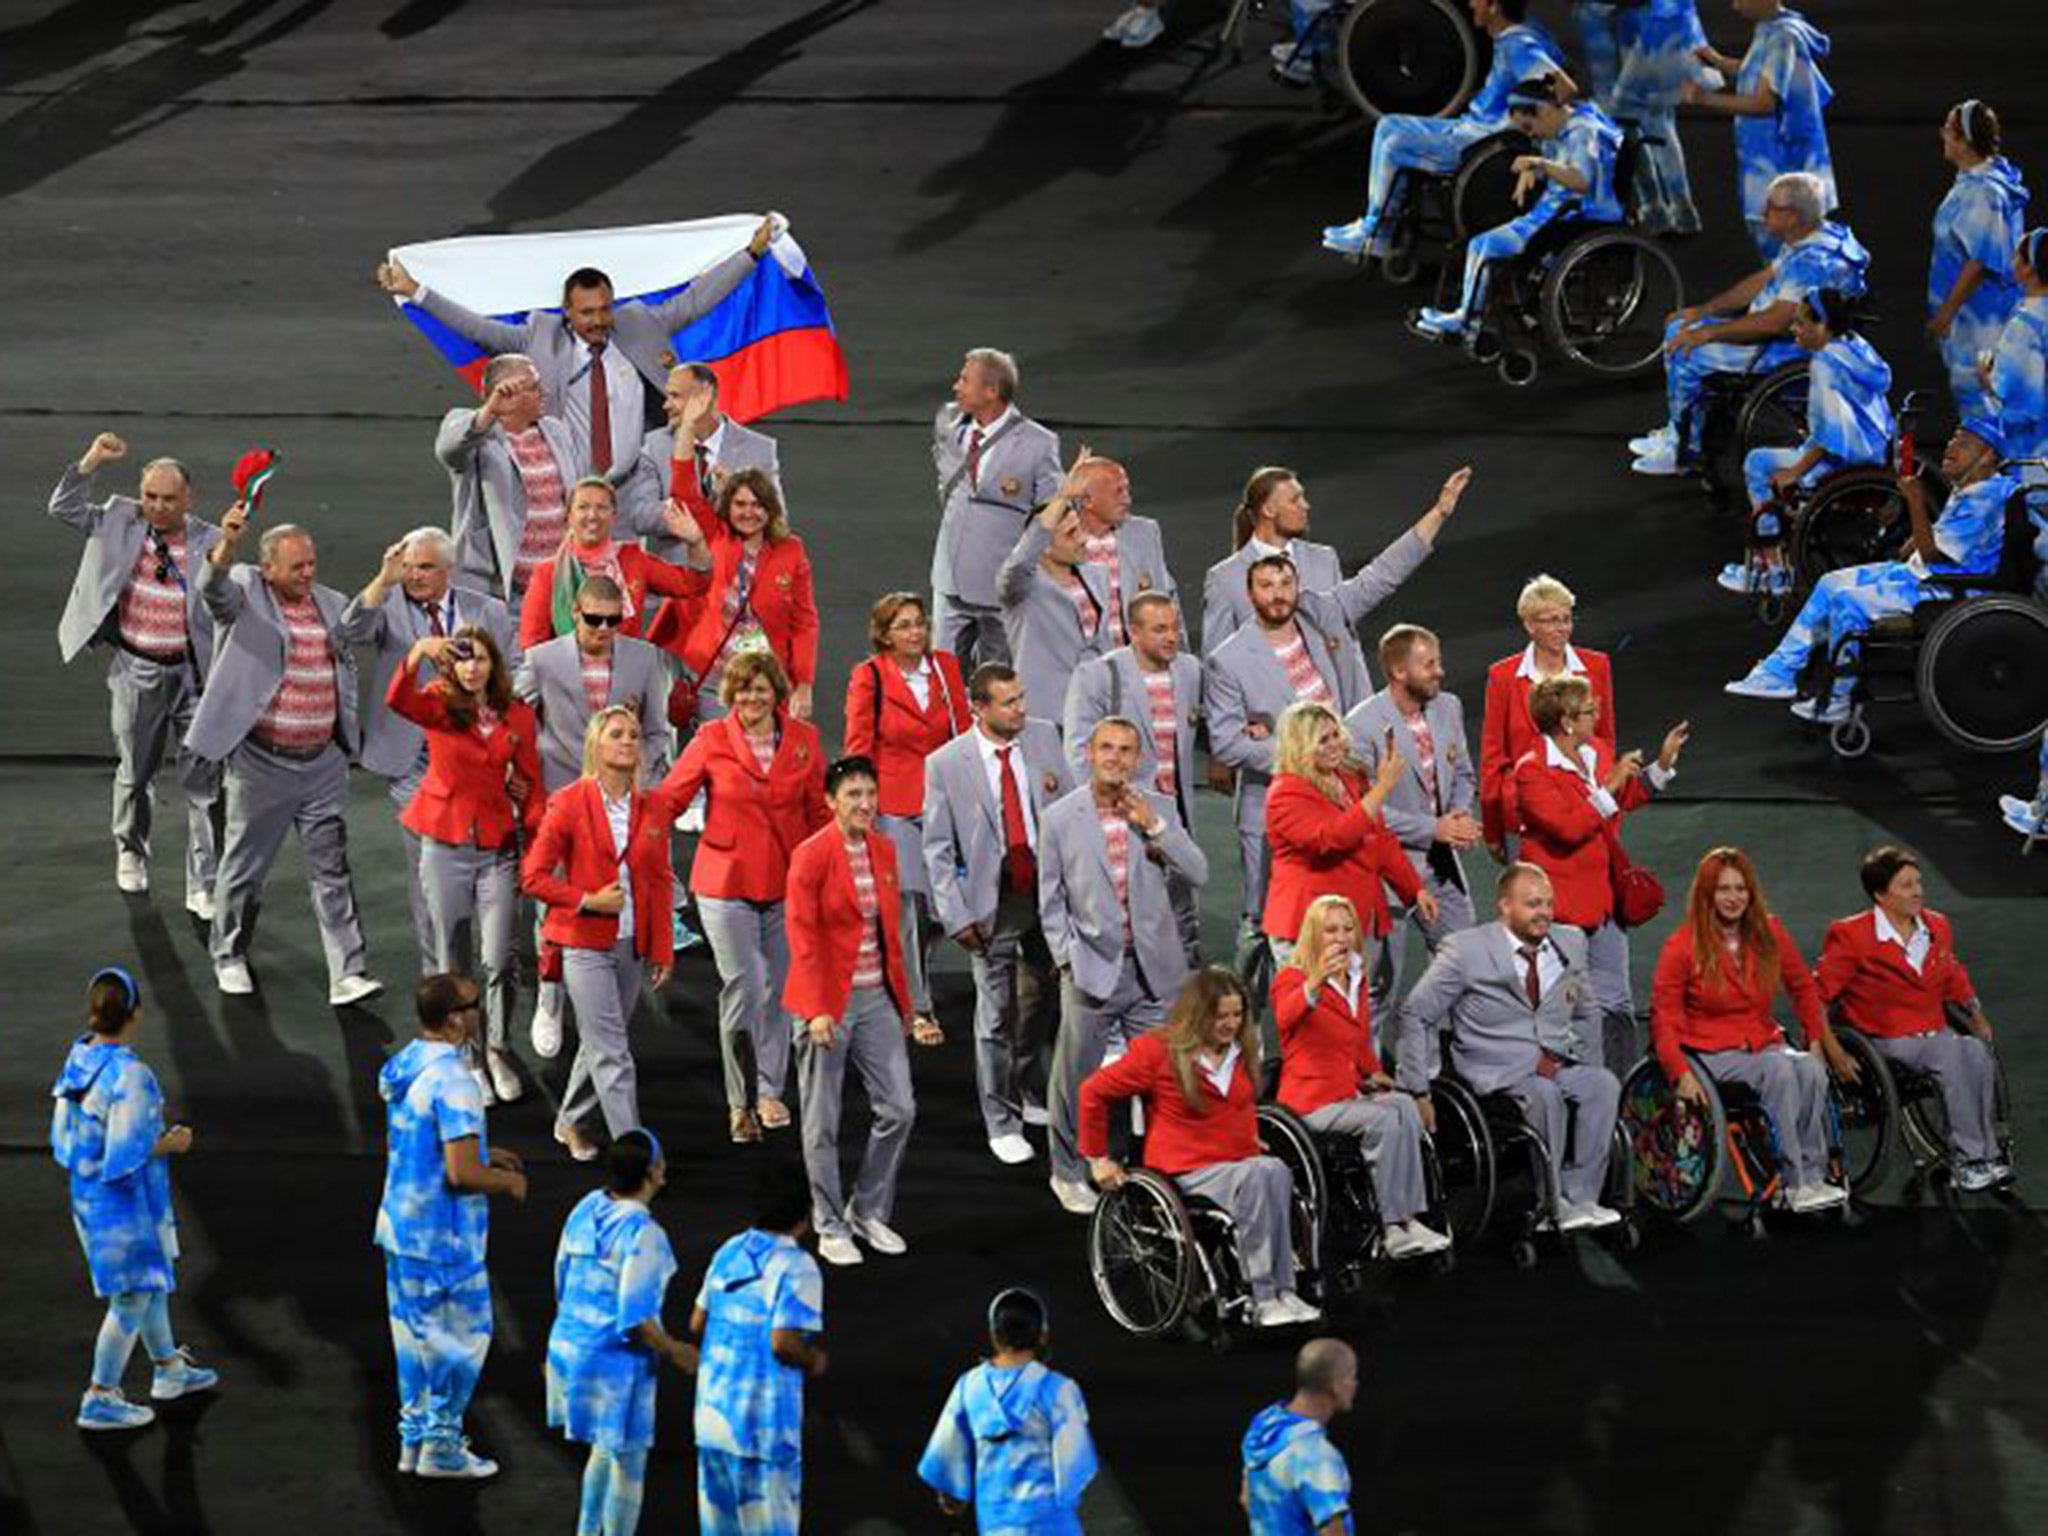 One member of the Belarus team carried out a pro-Russia protest during the Paralympic opening ceremony